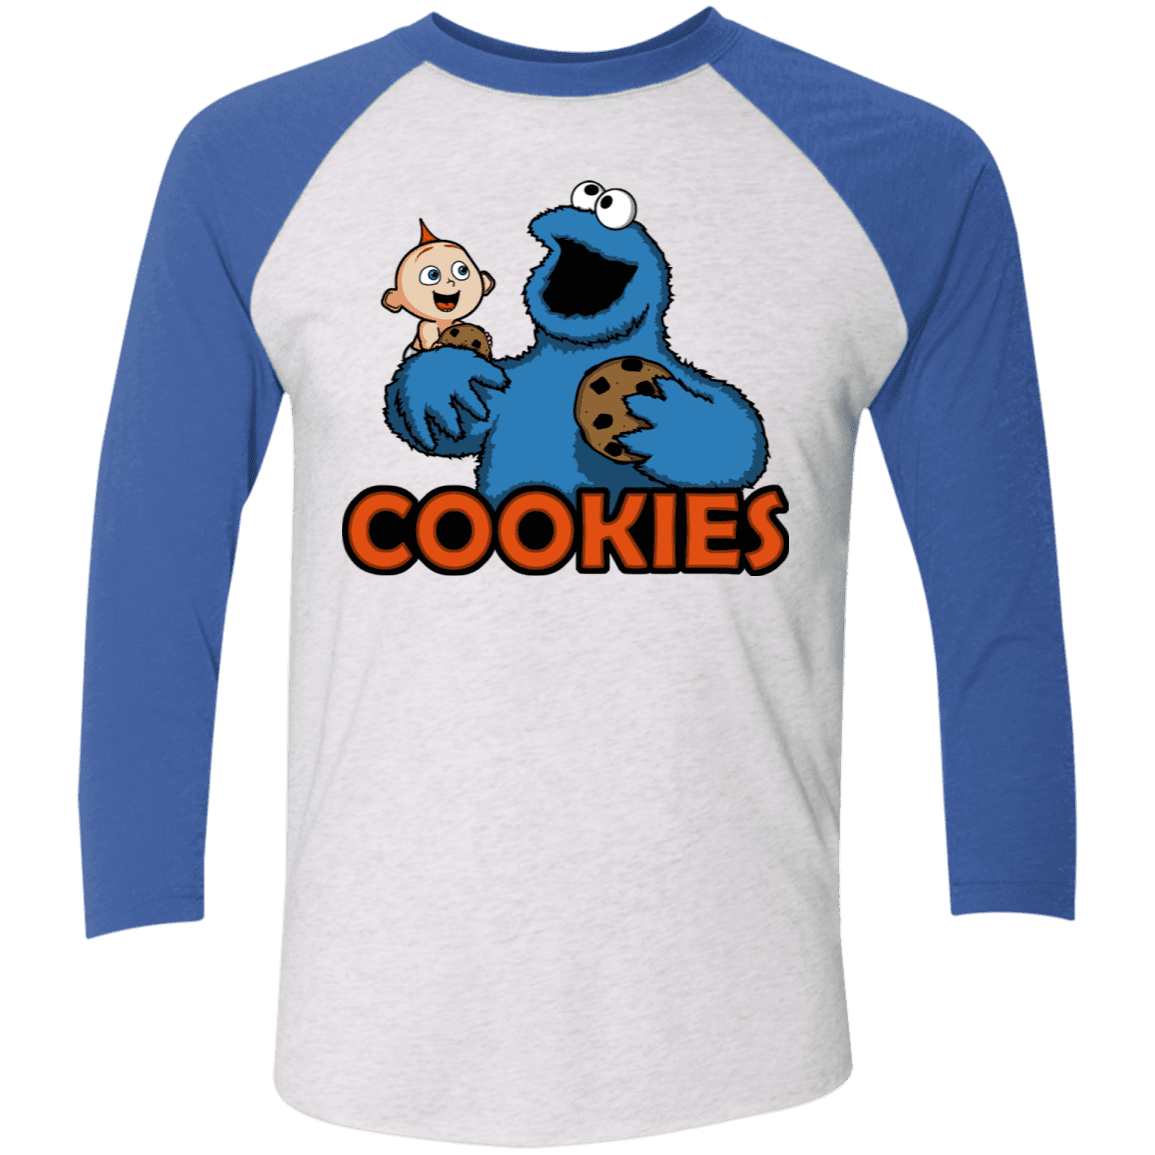 T-Shirts Heather White/Vintage Royal / X-Small Cookies Men's Triblend 3/4 Sleeve